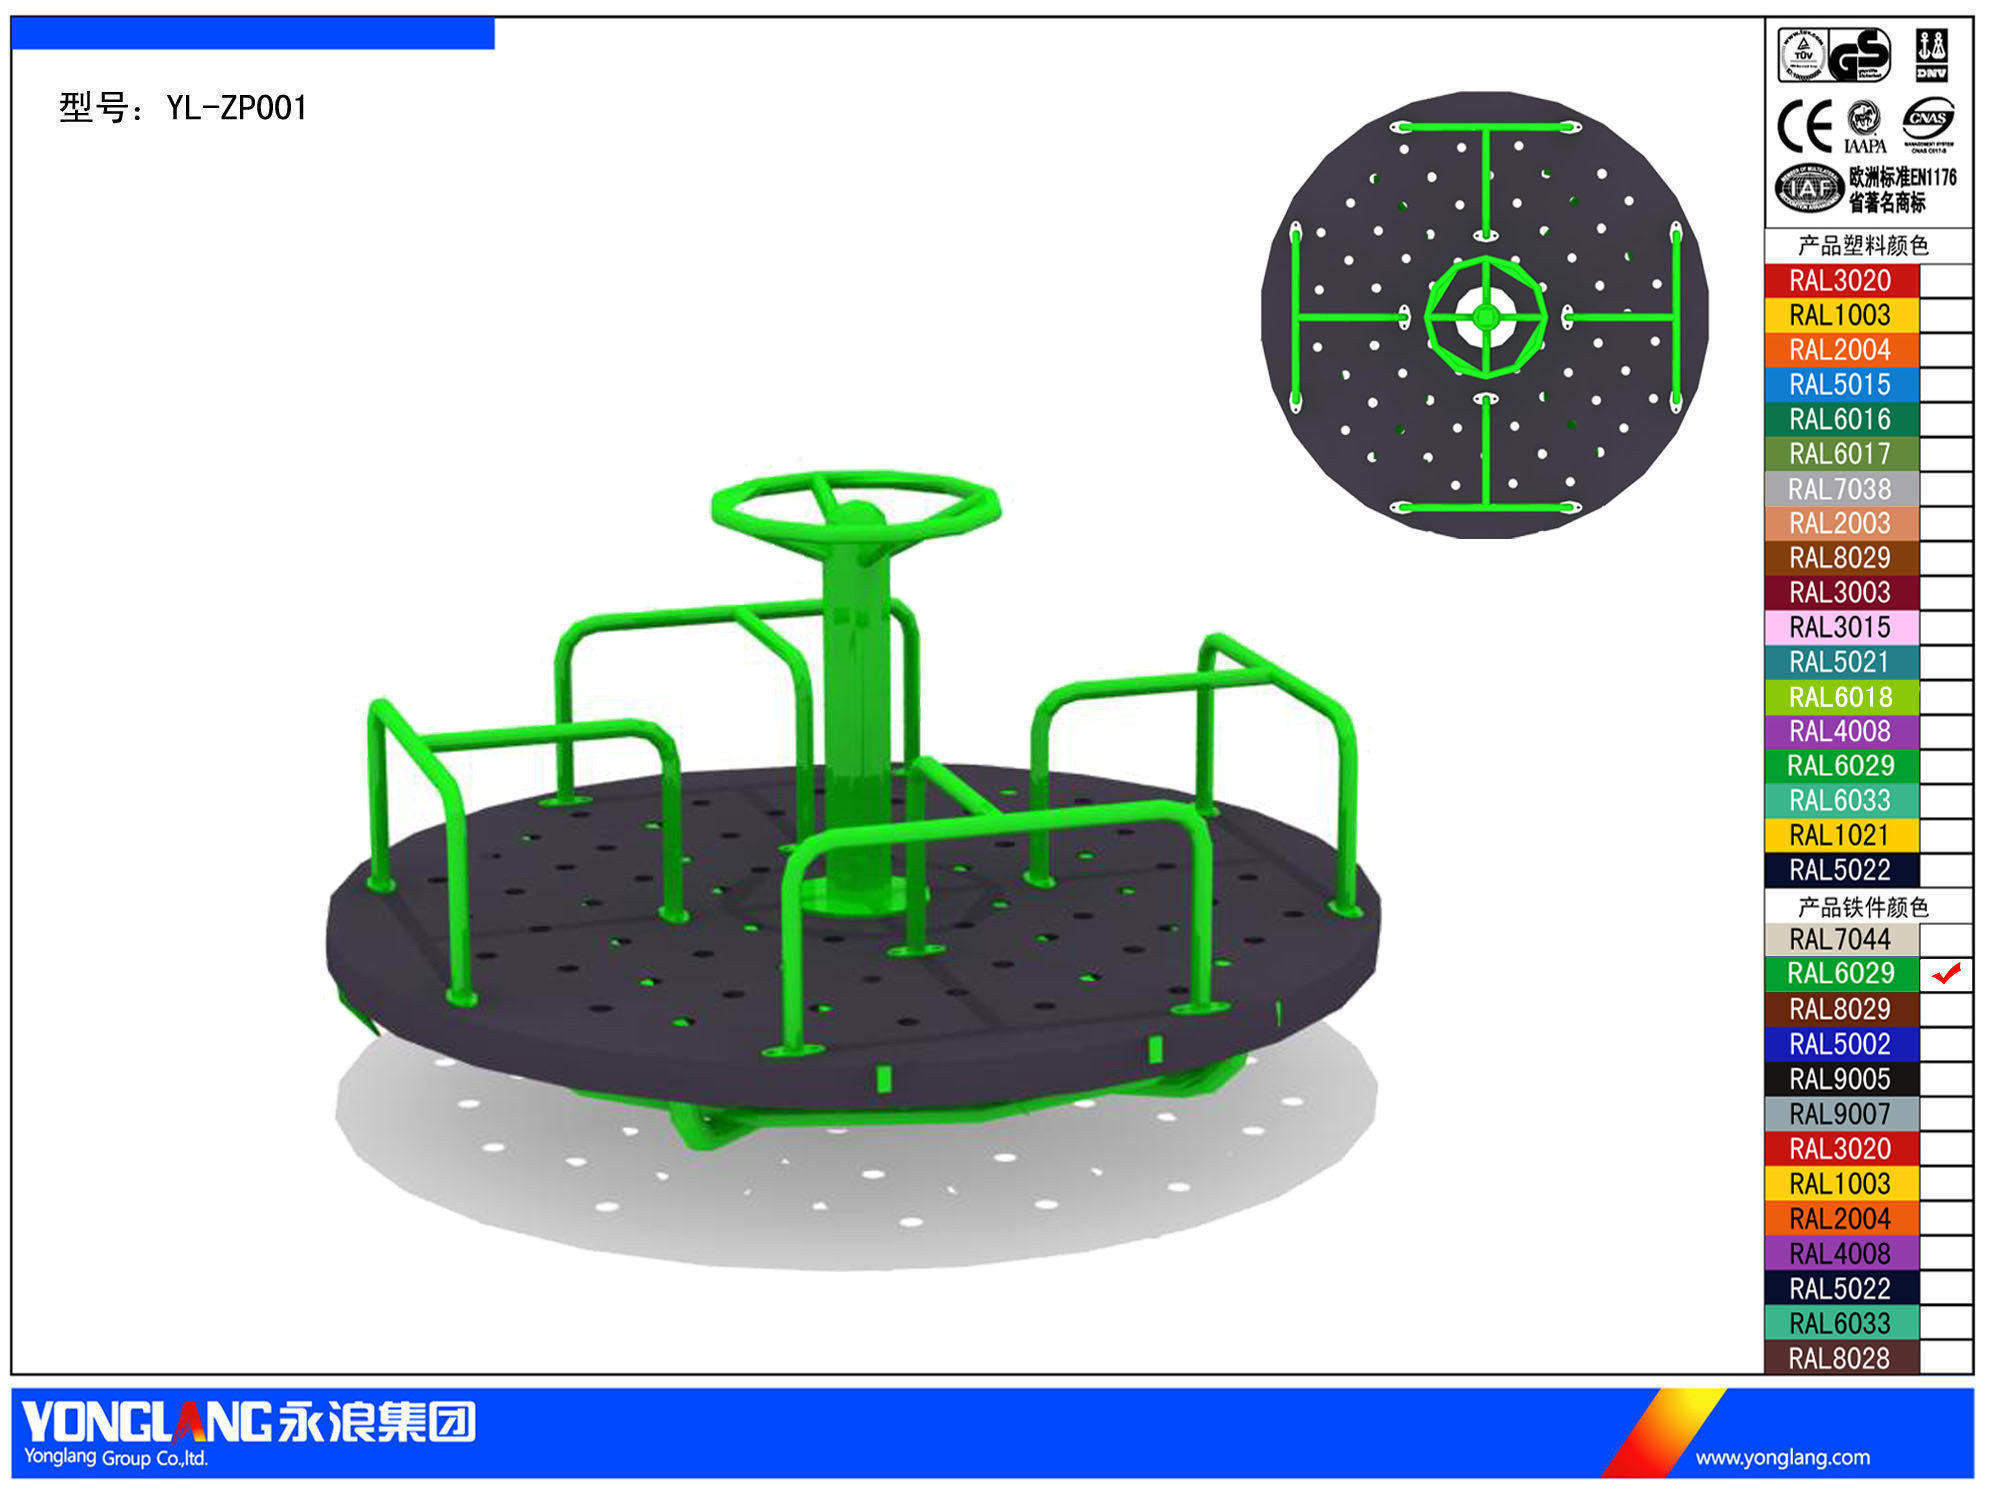 New Design of Seesaw